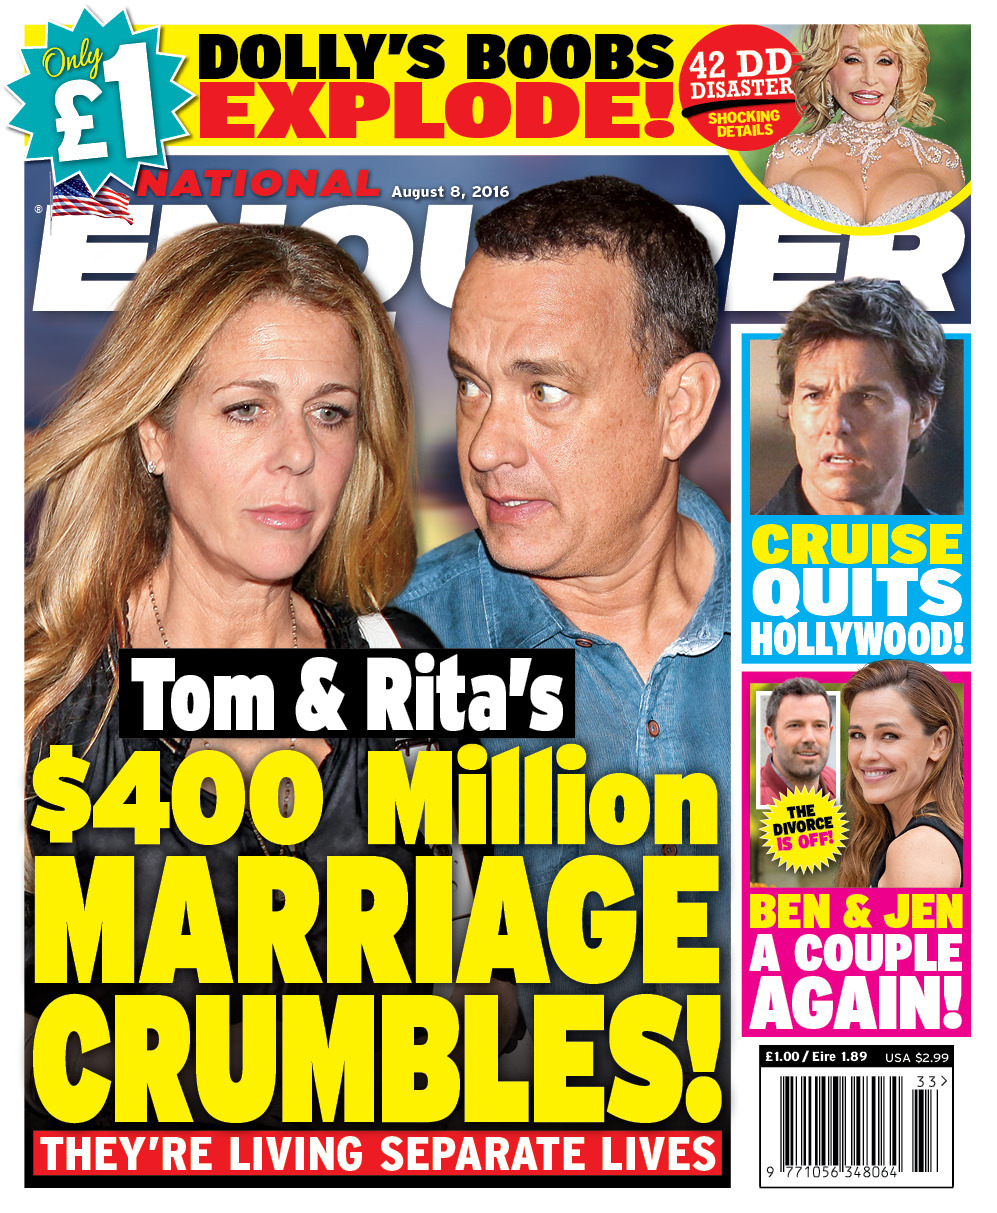 Tom & Rita’s $400 Million Marriage Crumbles! Find out how they’re living separate lives in the latest issue of National Enquirer on sale now, go here to find your nearest stockist